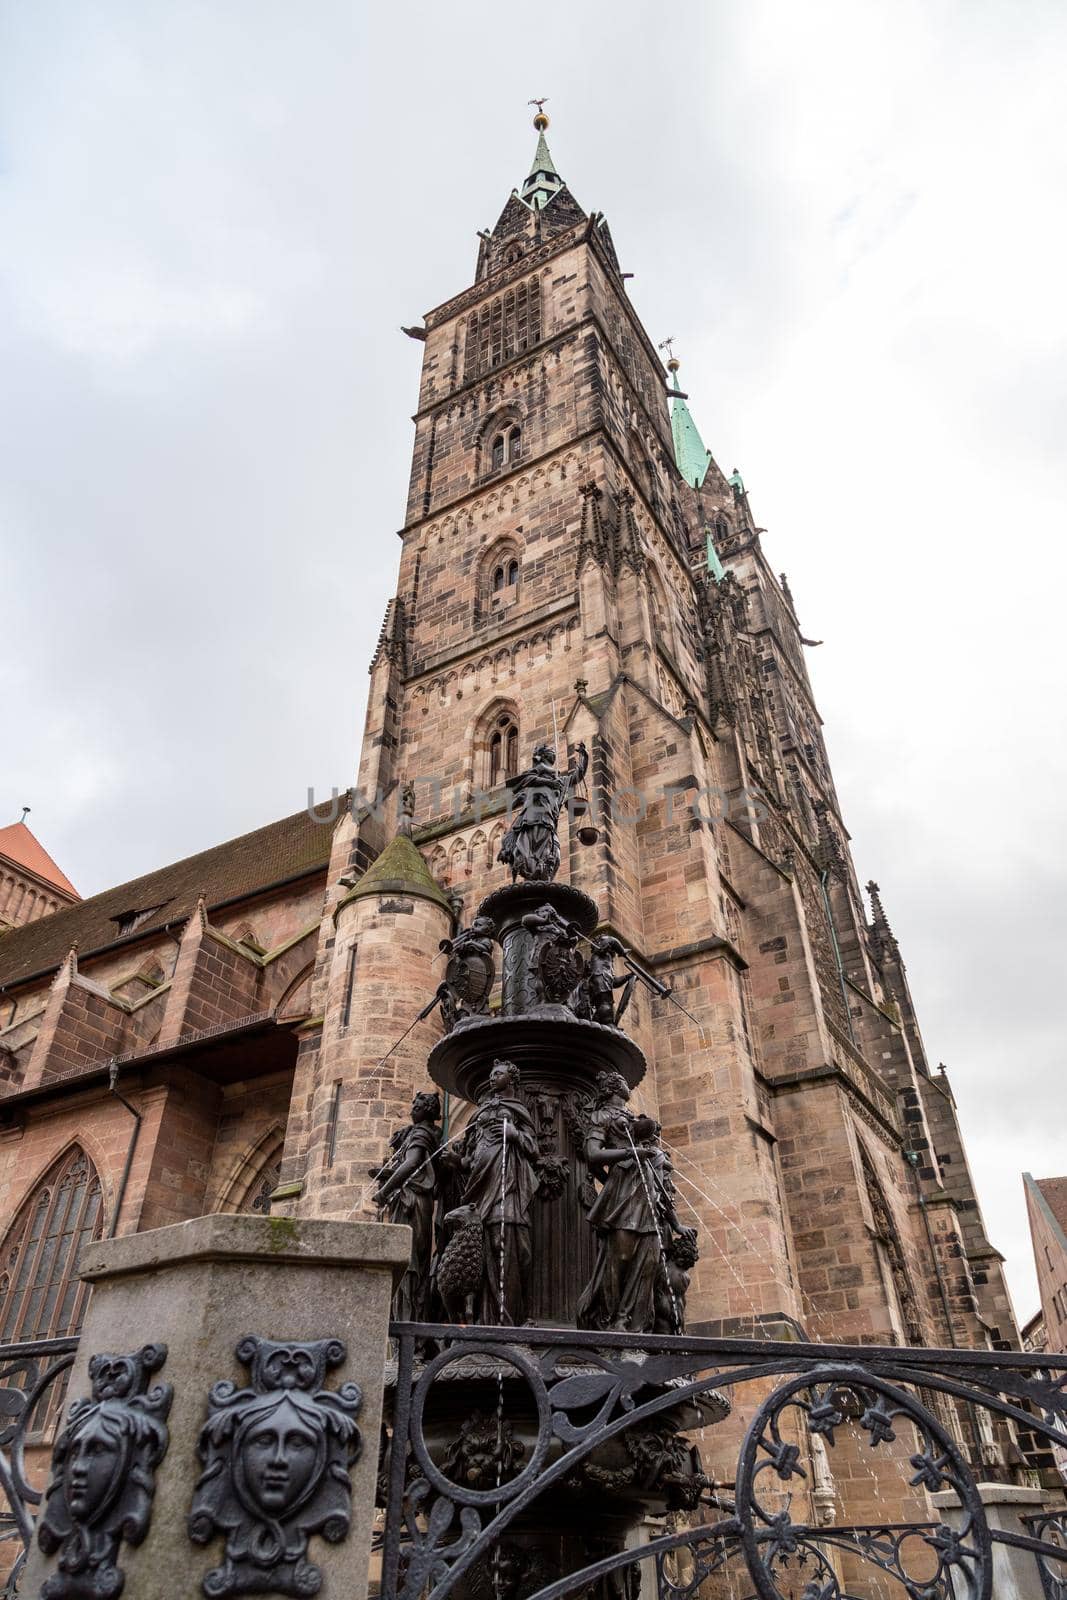 Tugendbrunnen in front of St. Lorenz church in the city Nuremberg, Bavaria, Germany by reinerc